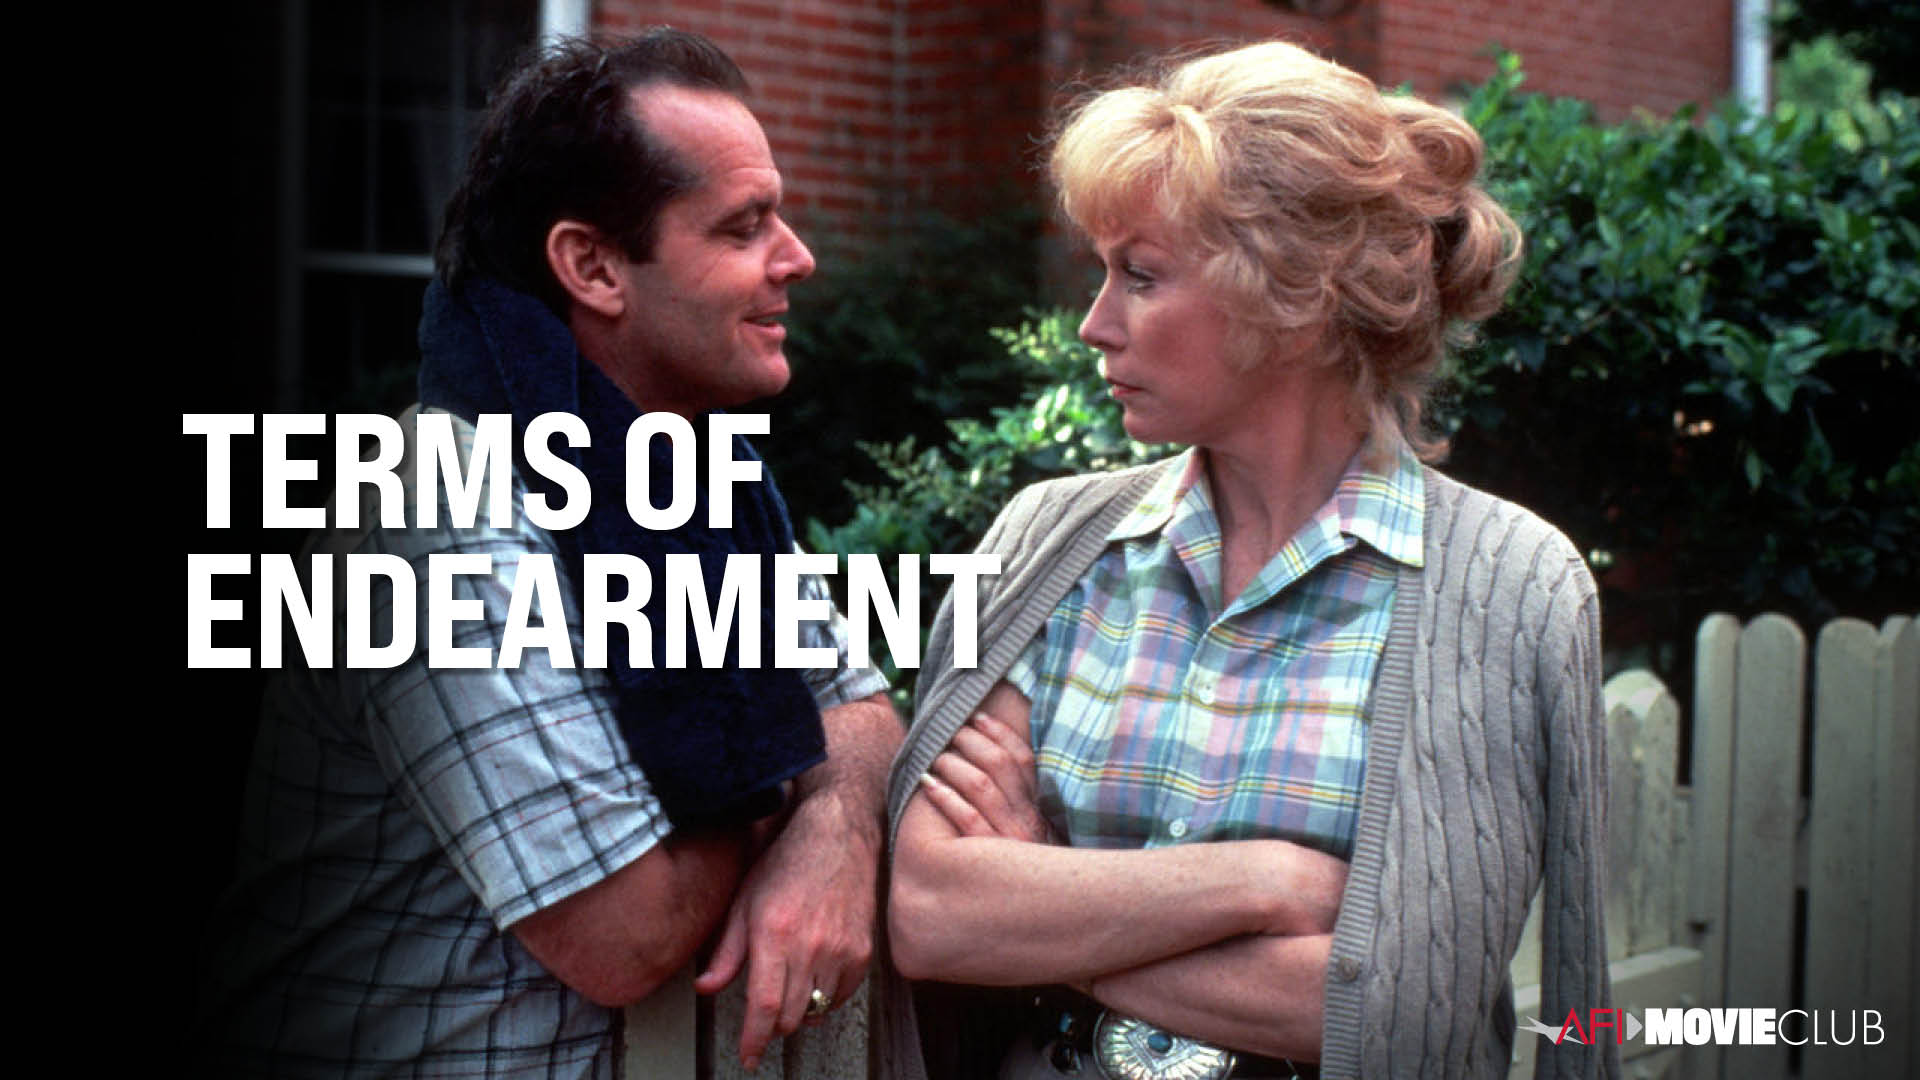 Terms of Endearment Film Still - Jack Nicholson and Shirley MacLaine